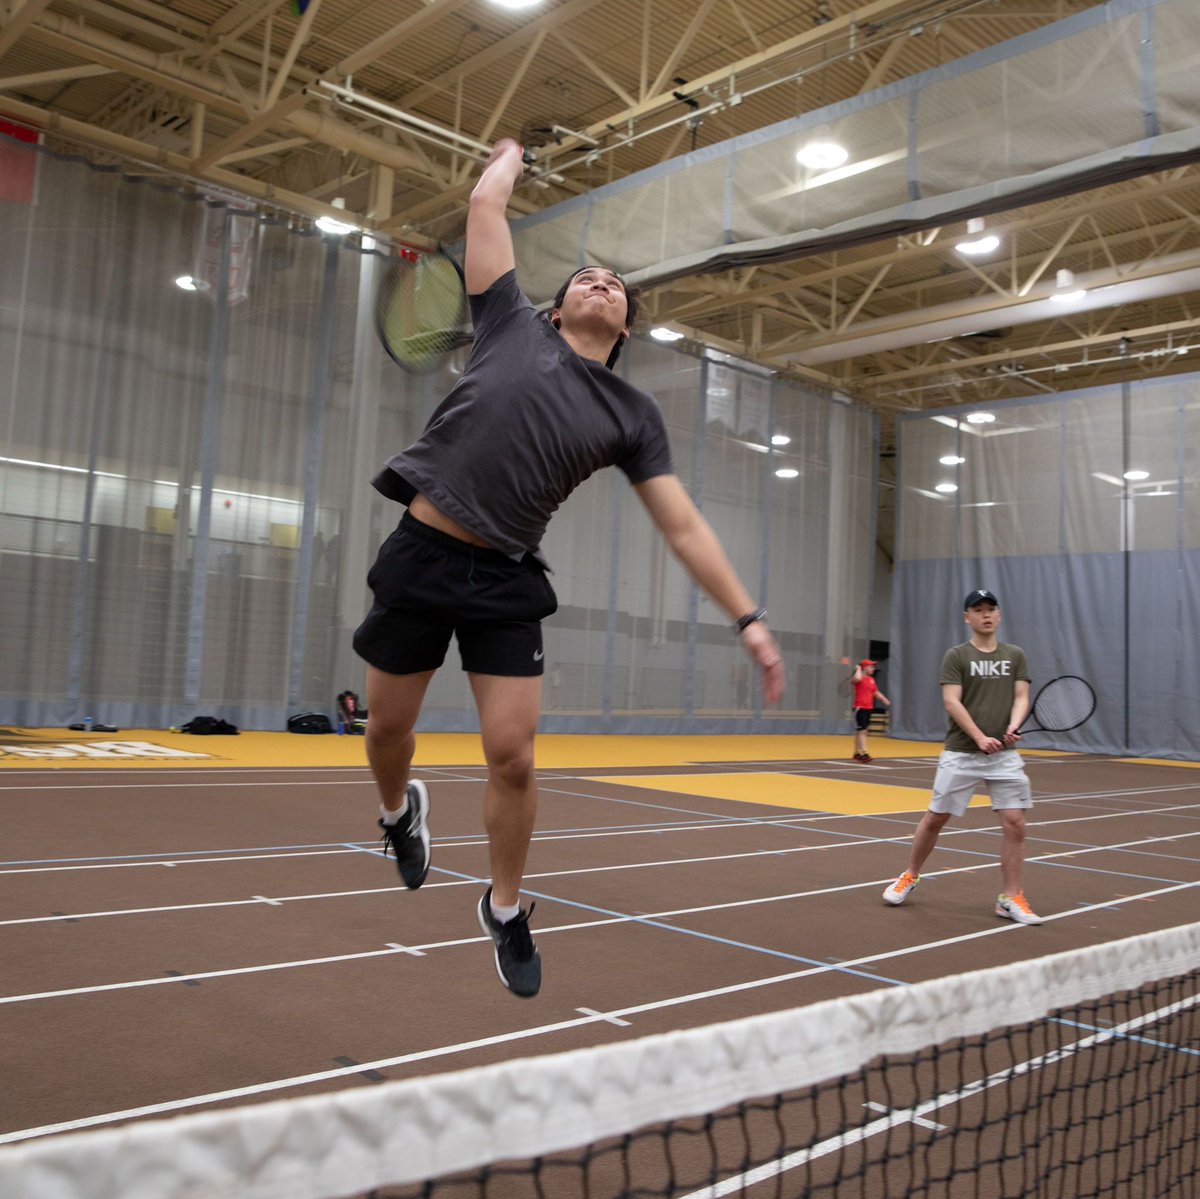 Discover your passion. Revitalize your recreation. Expand your skills. Join an Adult Program or Clubs with Rec Services! 

Classes start next week. Register your spot today! 

For Adult Programs:buff.ly/3pZm7wD For Clubs:buff.ly/3M5kIwh 

#UManitoba #UMRecreation